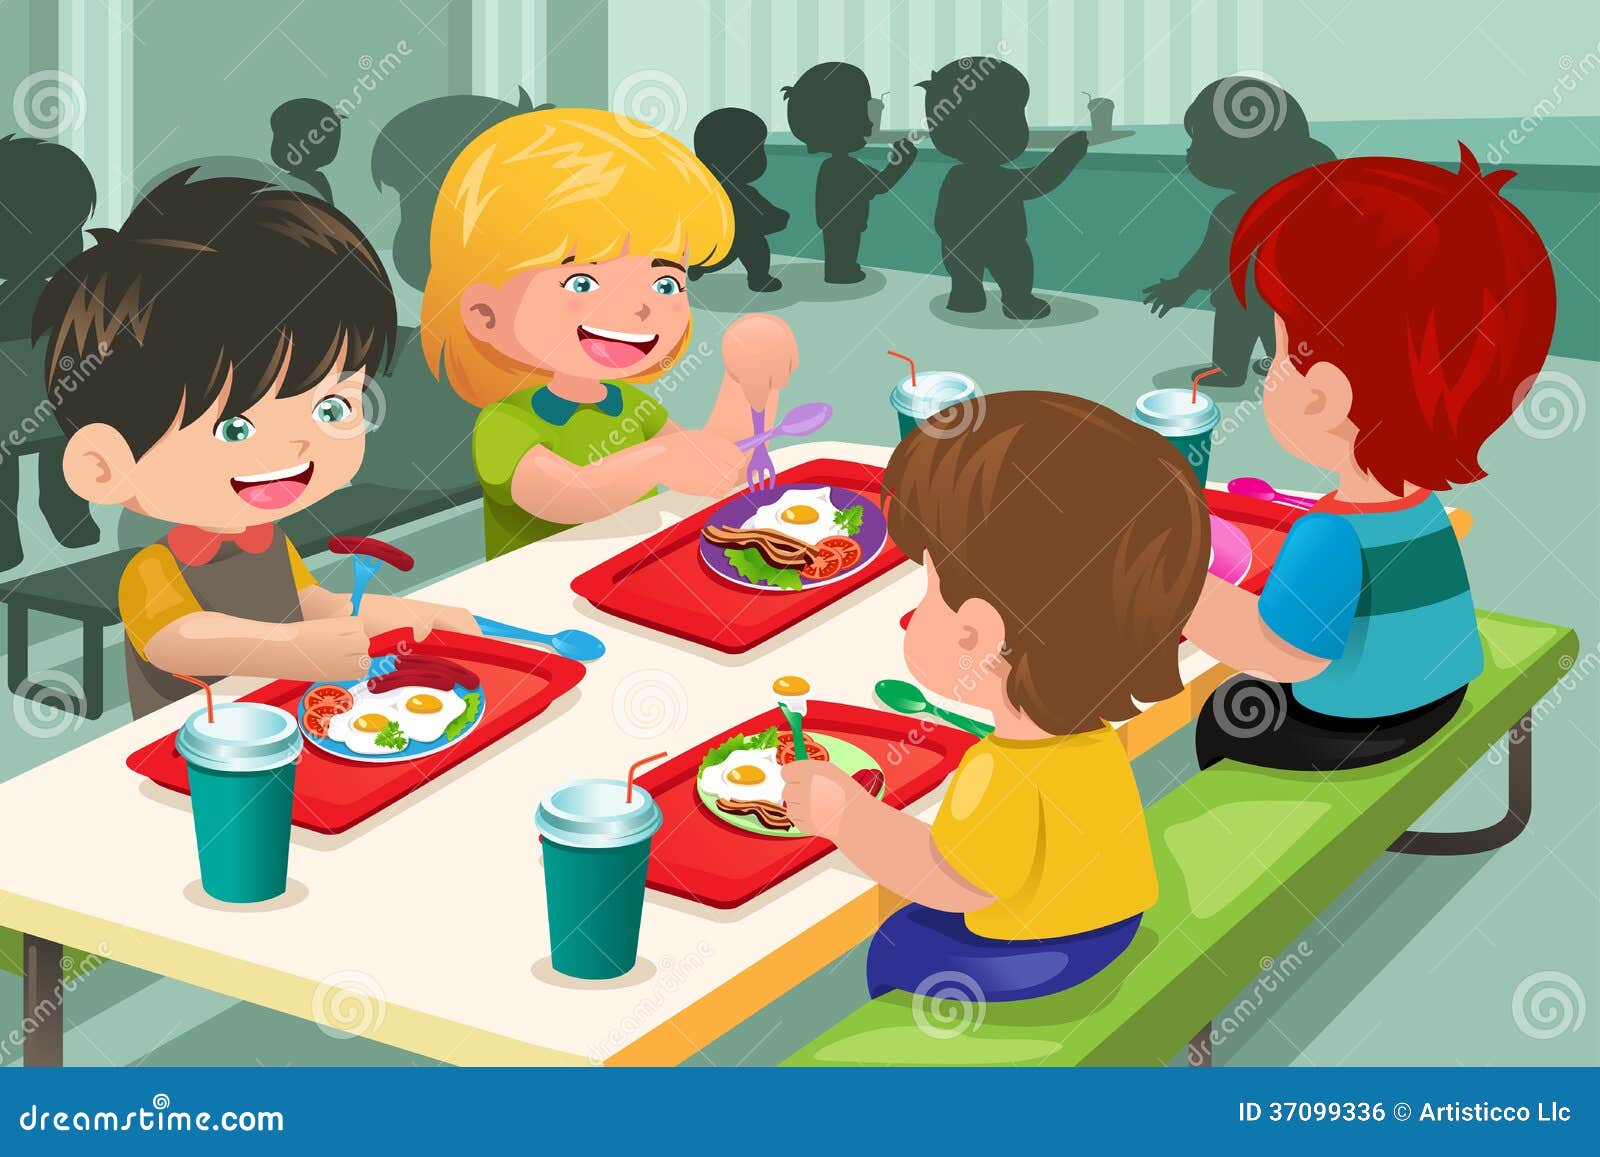 clipart cafeteria - photo #40